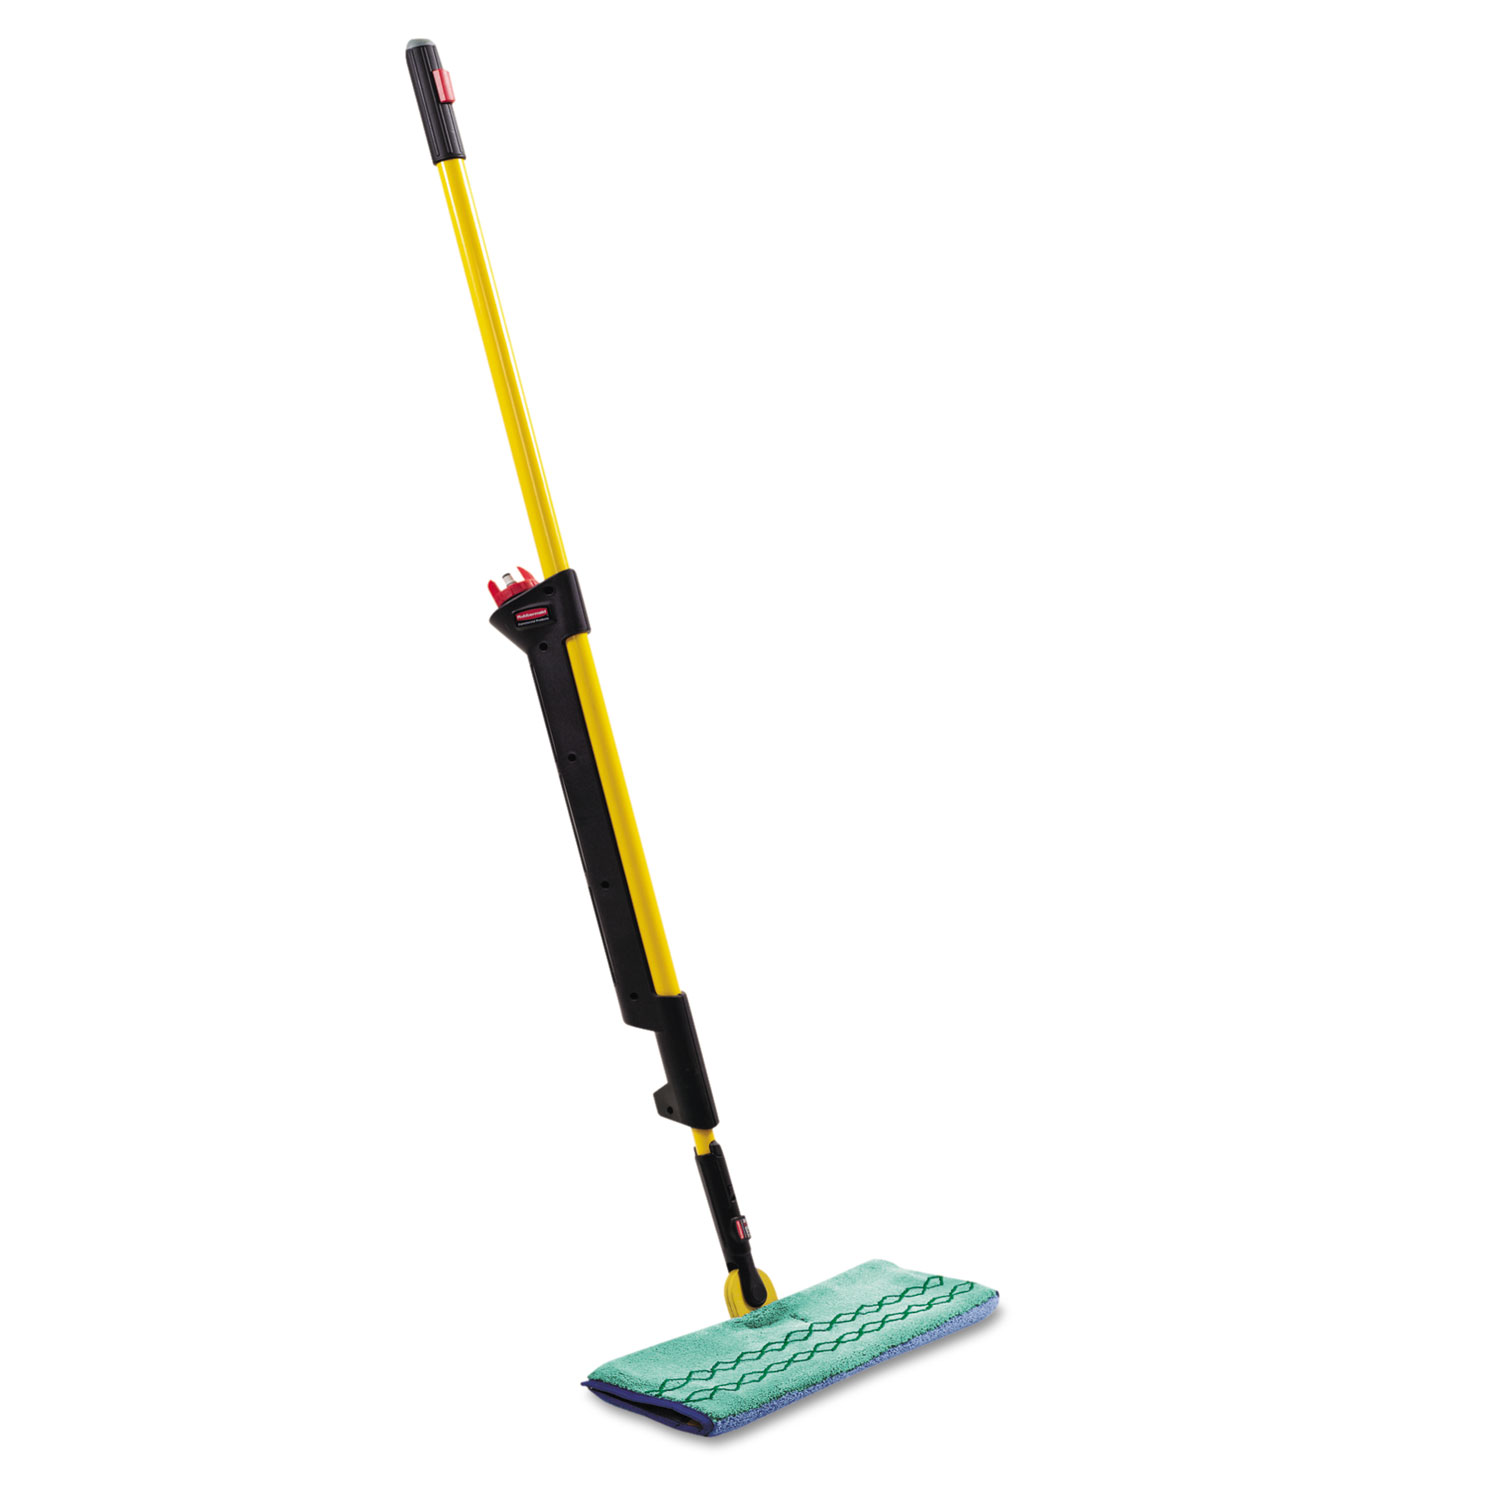 Pulse Mopping Kit, 4.25 x 3.25 x 52